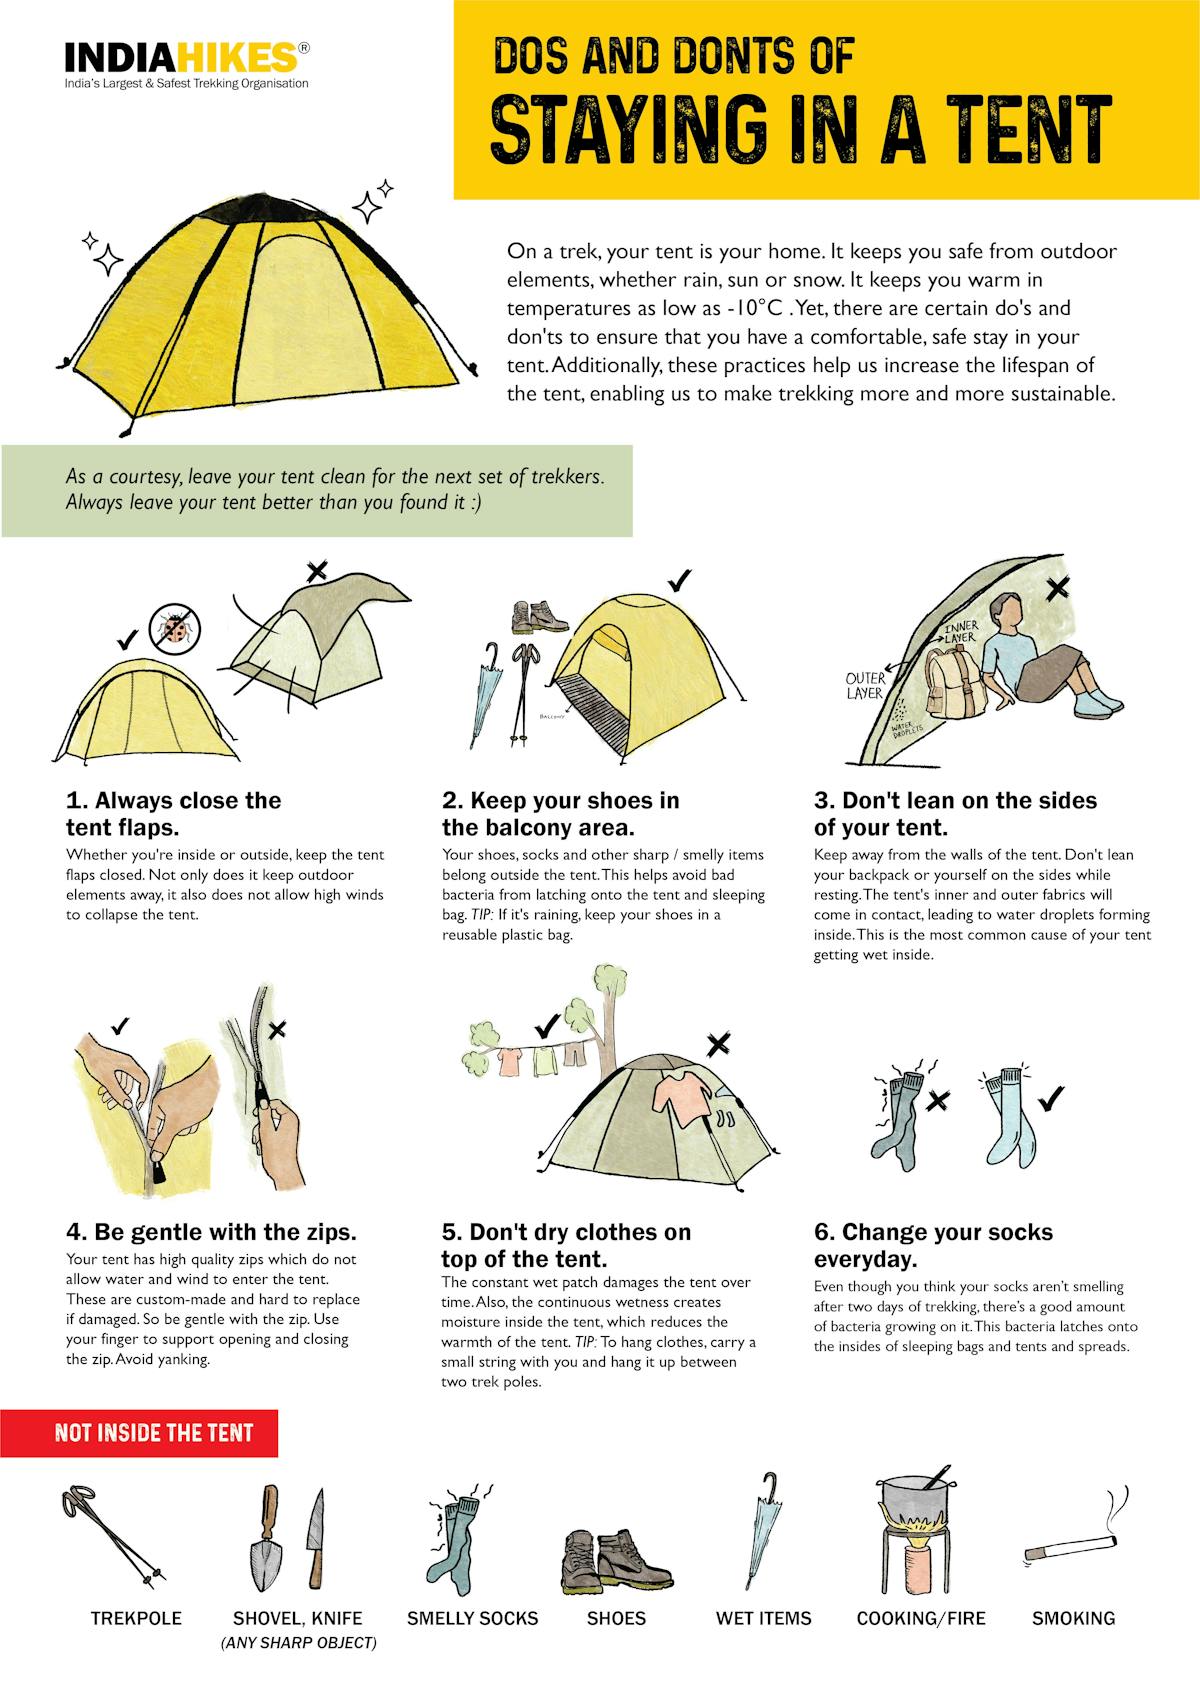 7 Rules Of Tent Etiquette That Make You A Great Tent Mate